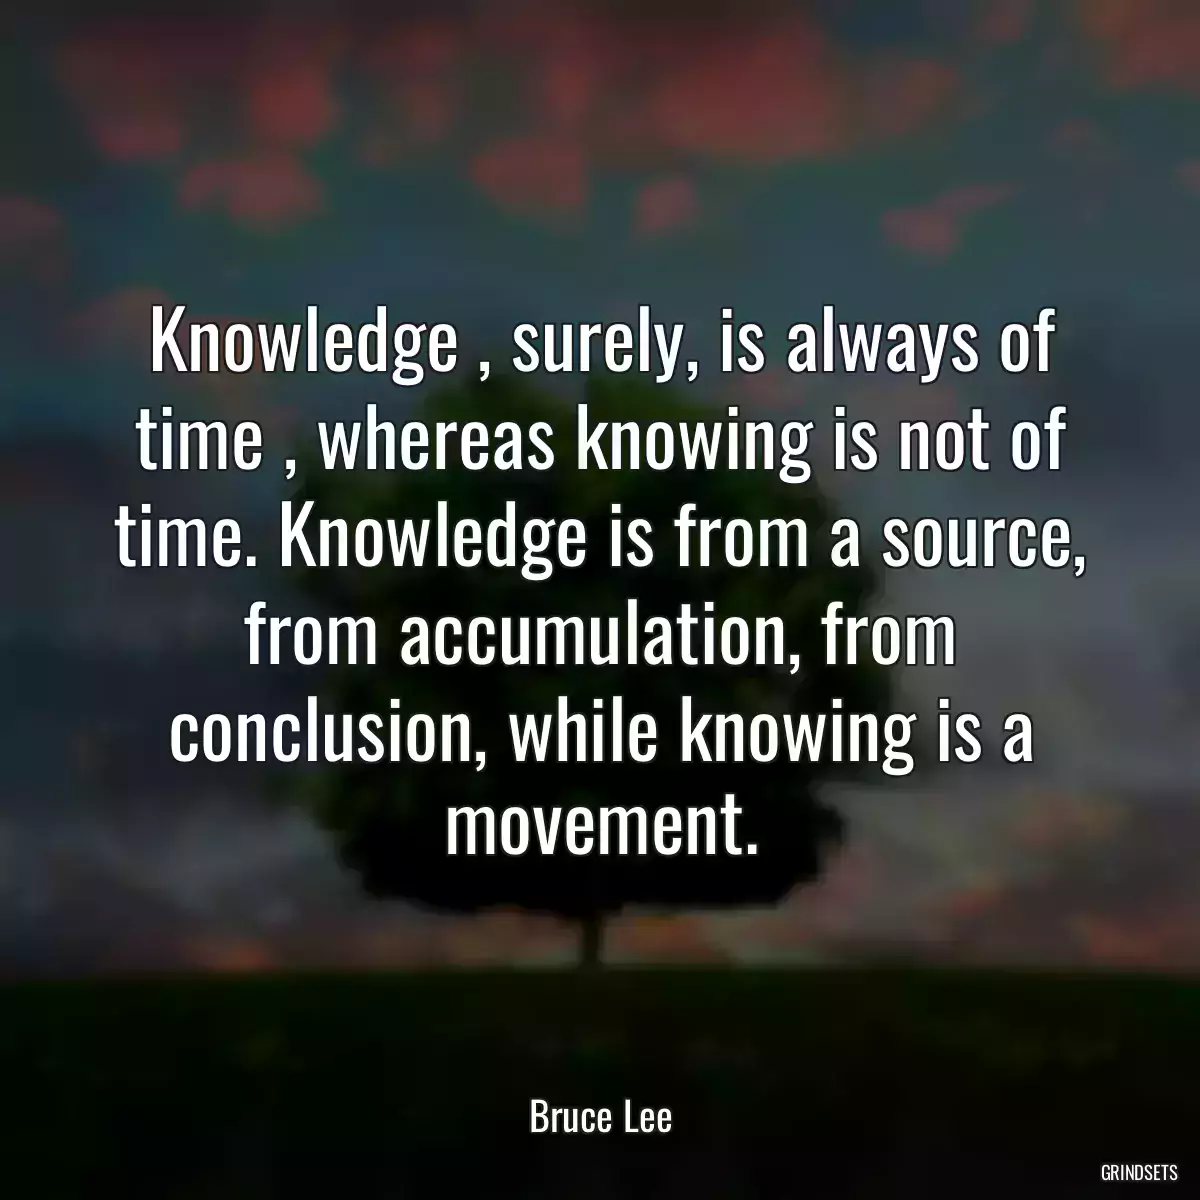 Knowledge , surely, is always of time , whereas knowing is not of time. Knowledge is from a source, from accumulation, from conclusion, while knowing is a movement.